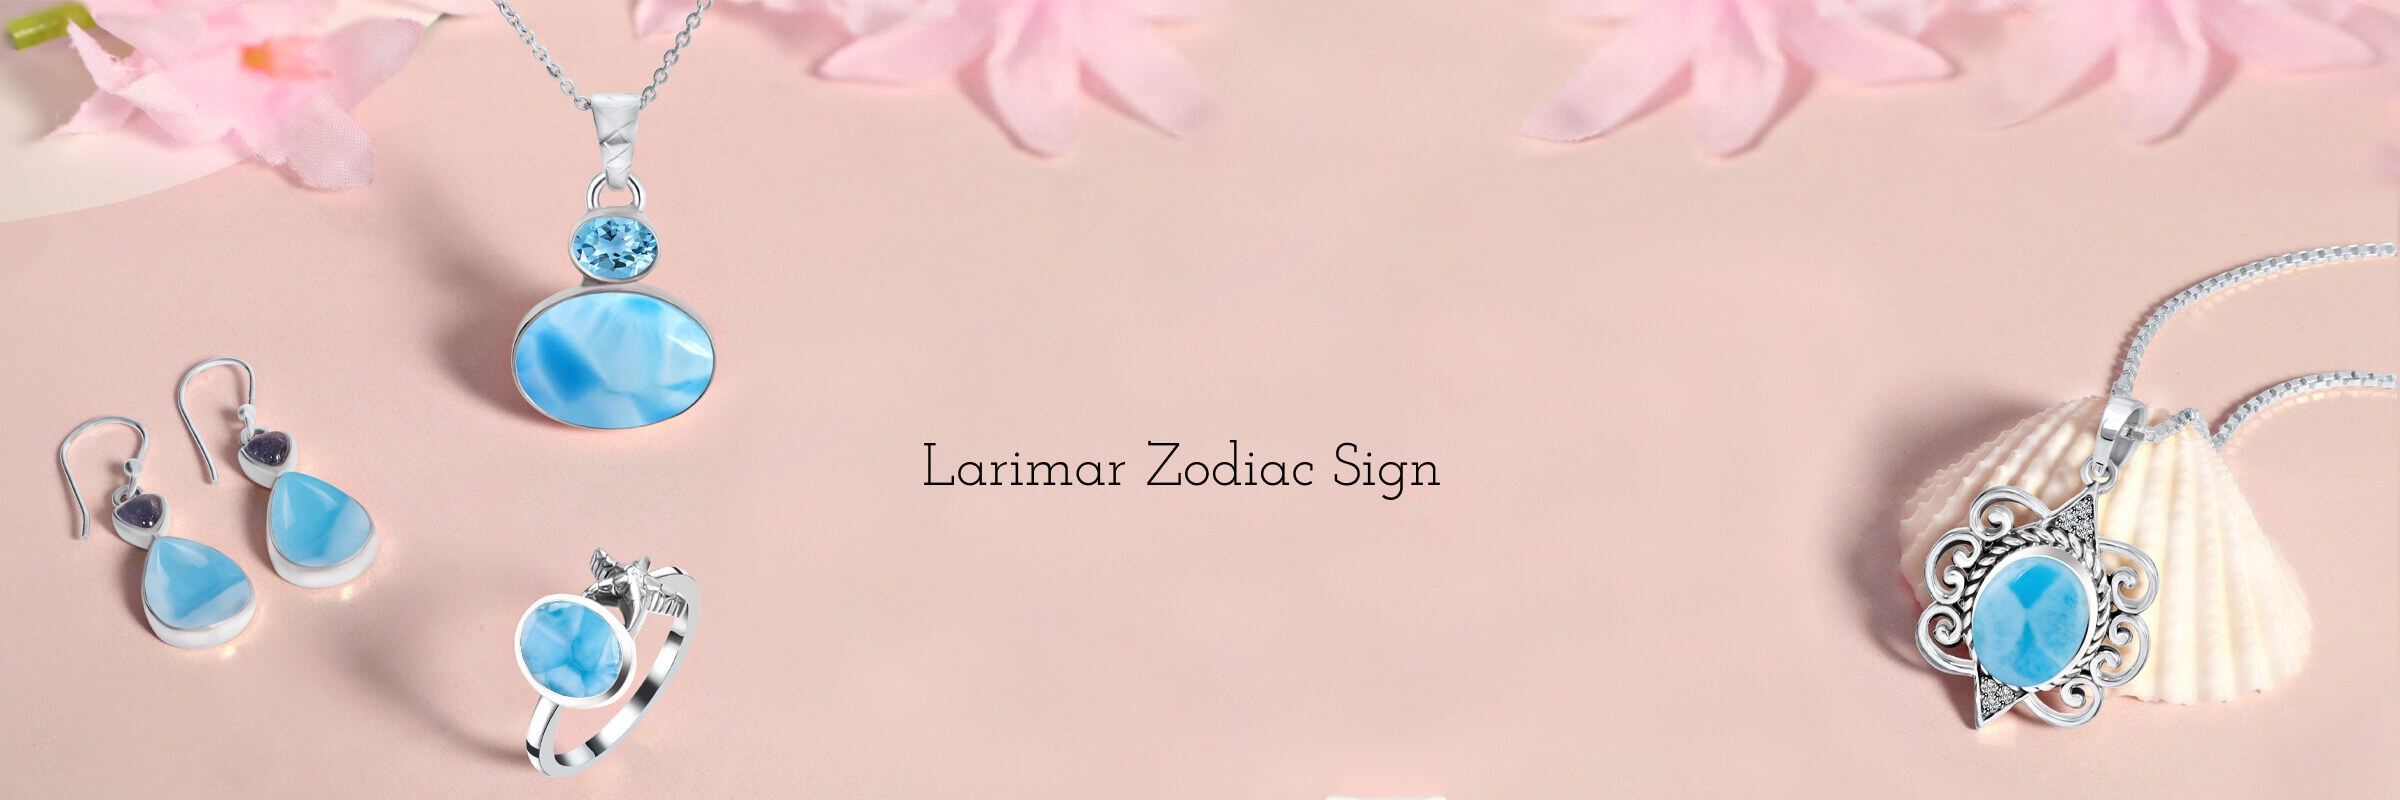 Zodiac sign associated with Larimar